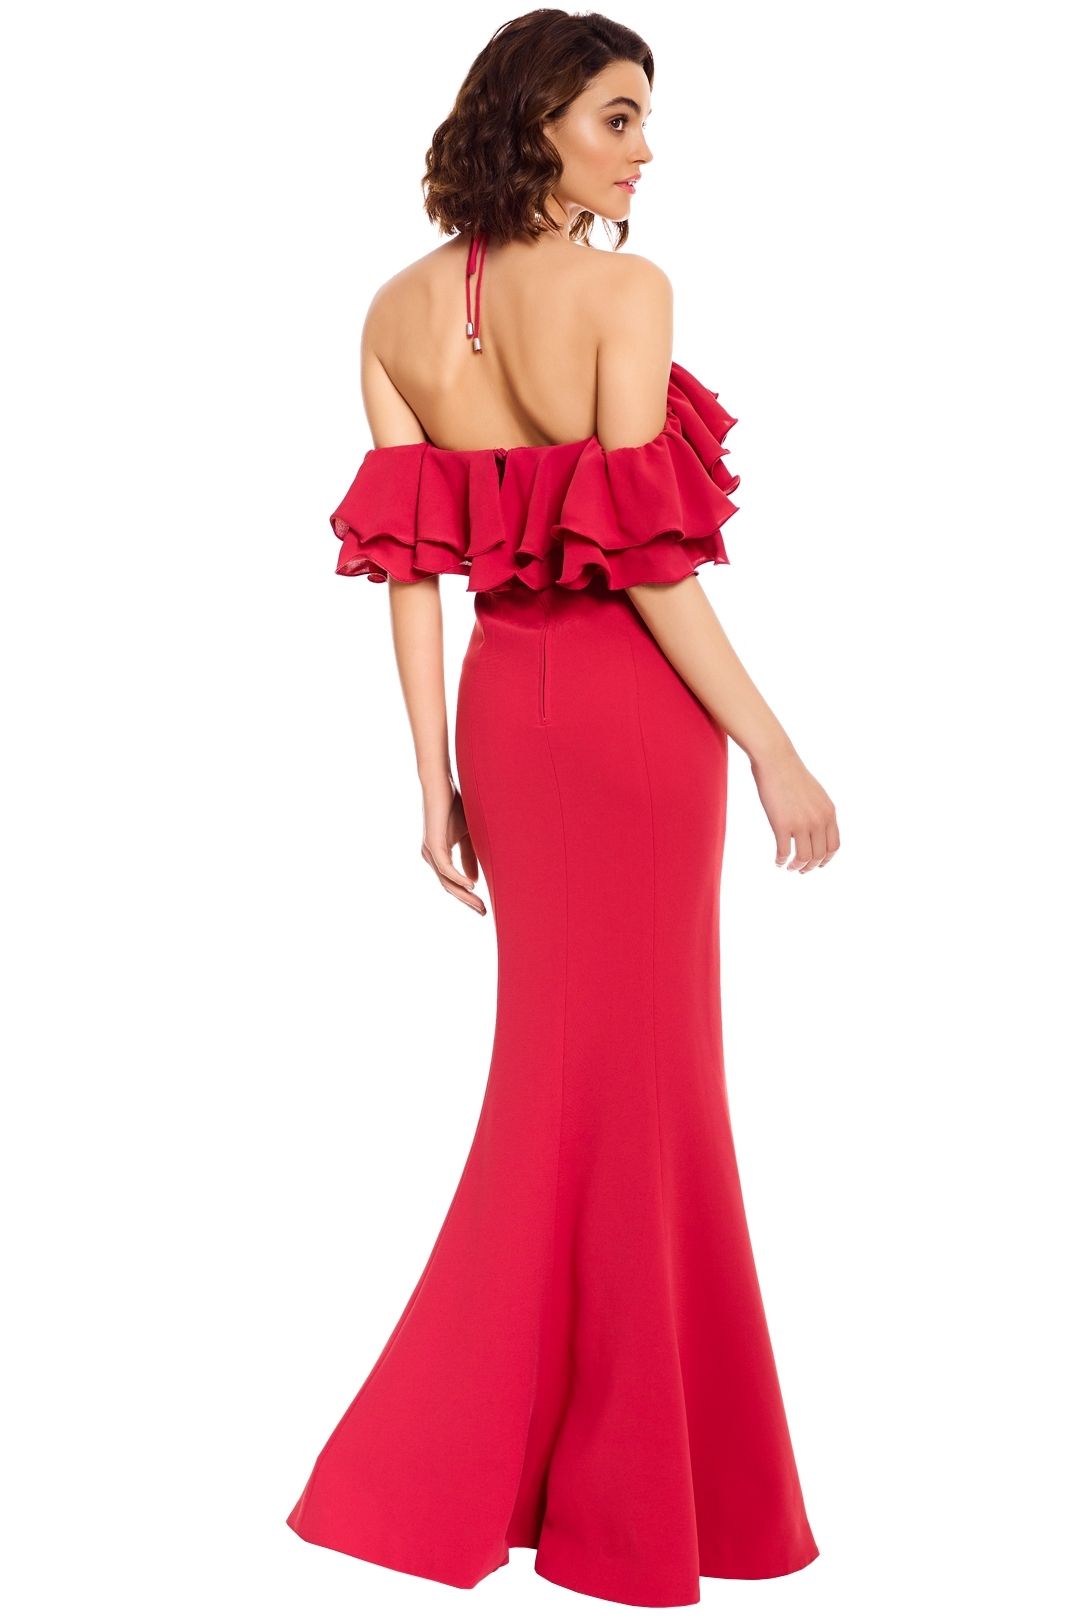 CMEO Collective - Immerse Gown - Rose - Back